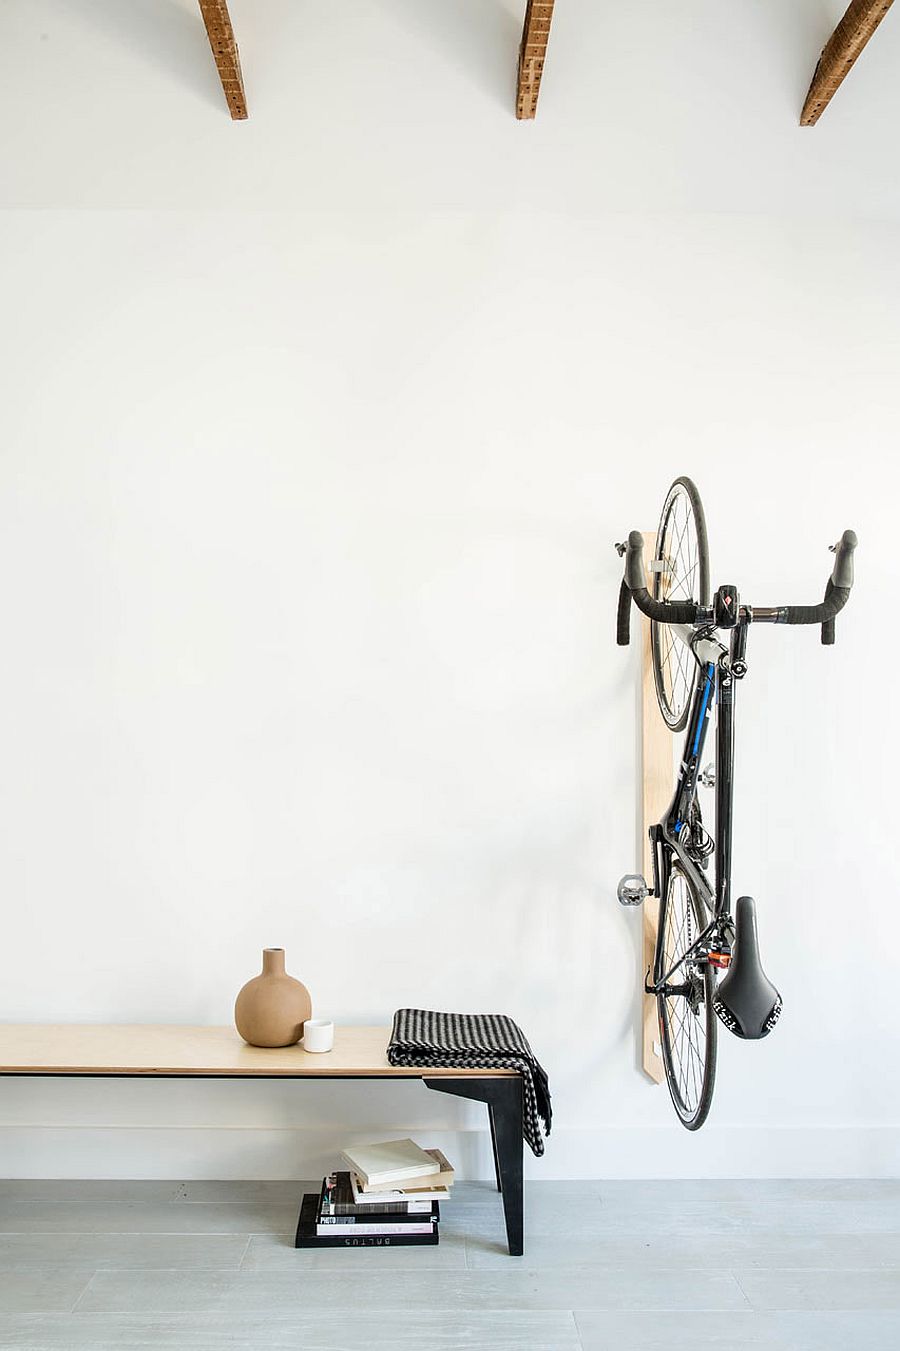 Bicycle used as a decorative piece inside the bachelor pad